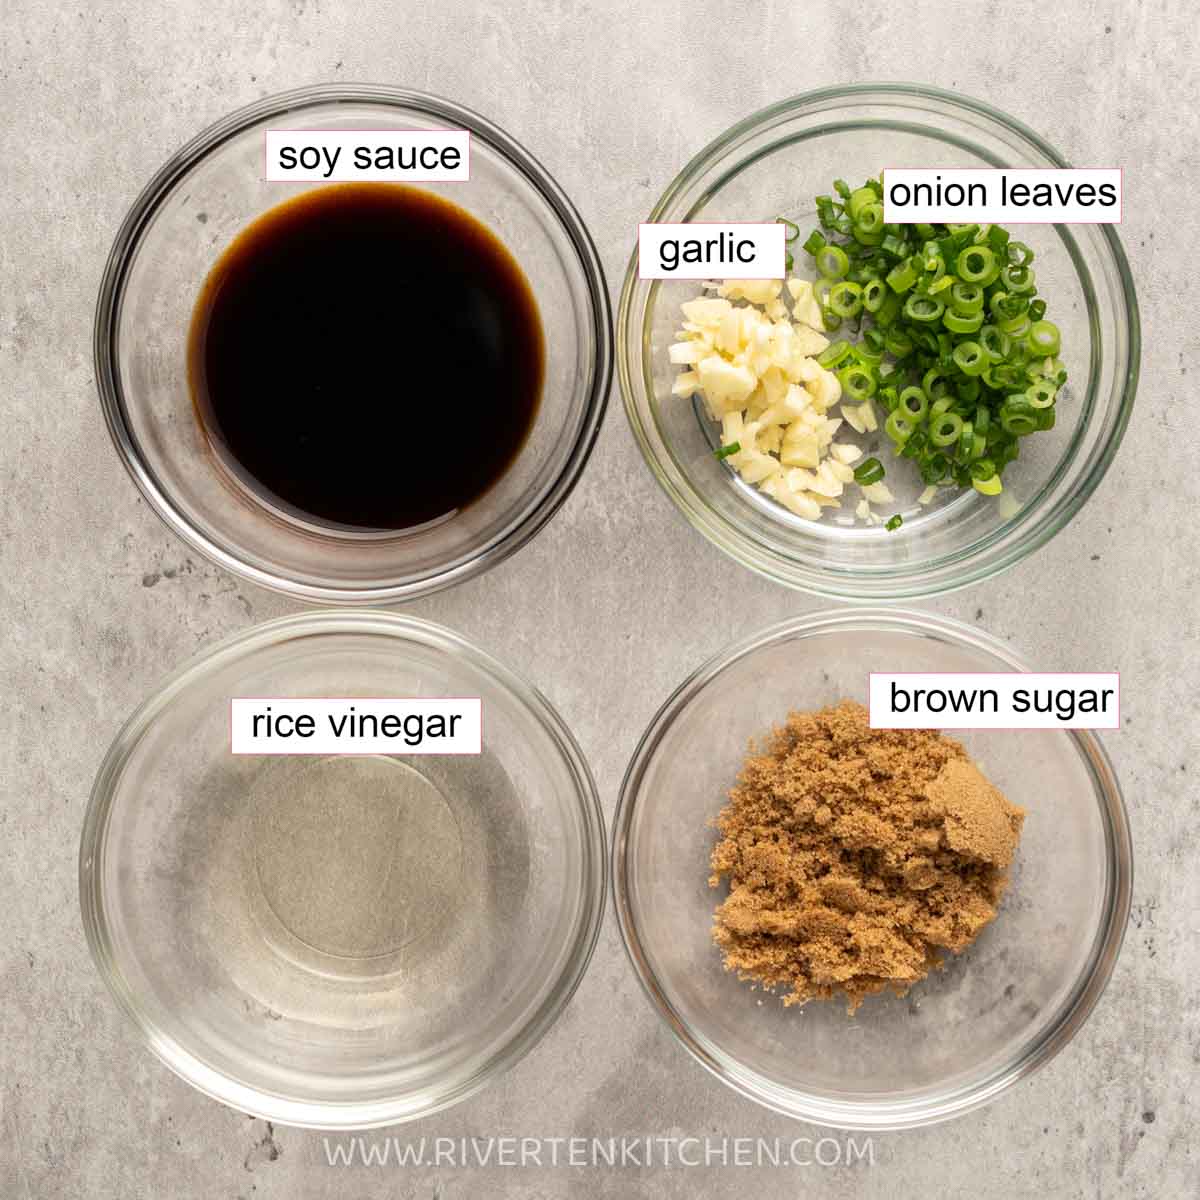 soy sauce, rice vinegar, garlic, scallions or green onions and brown sugar